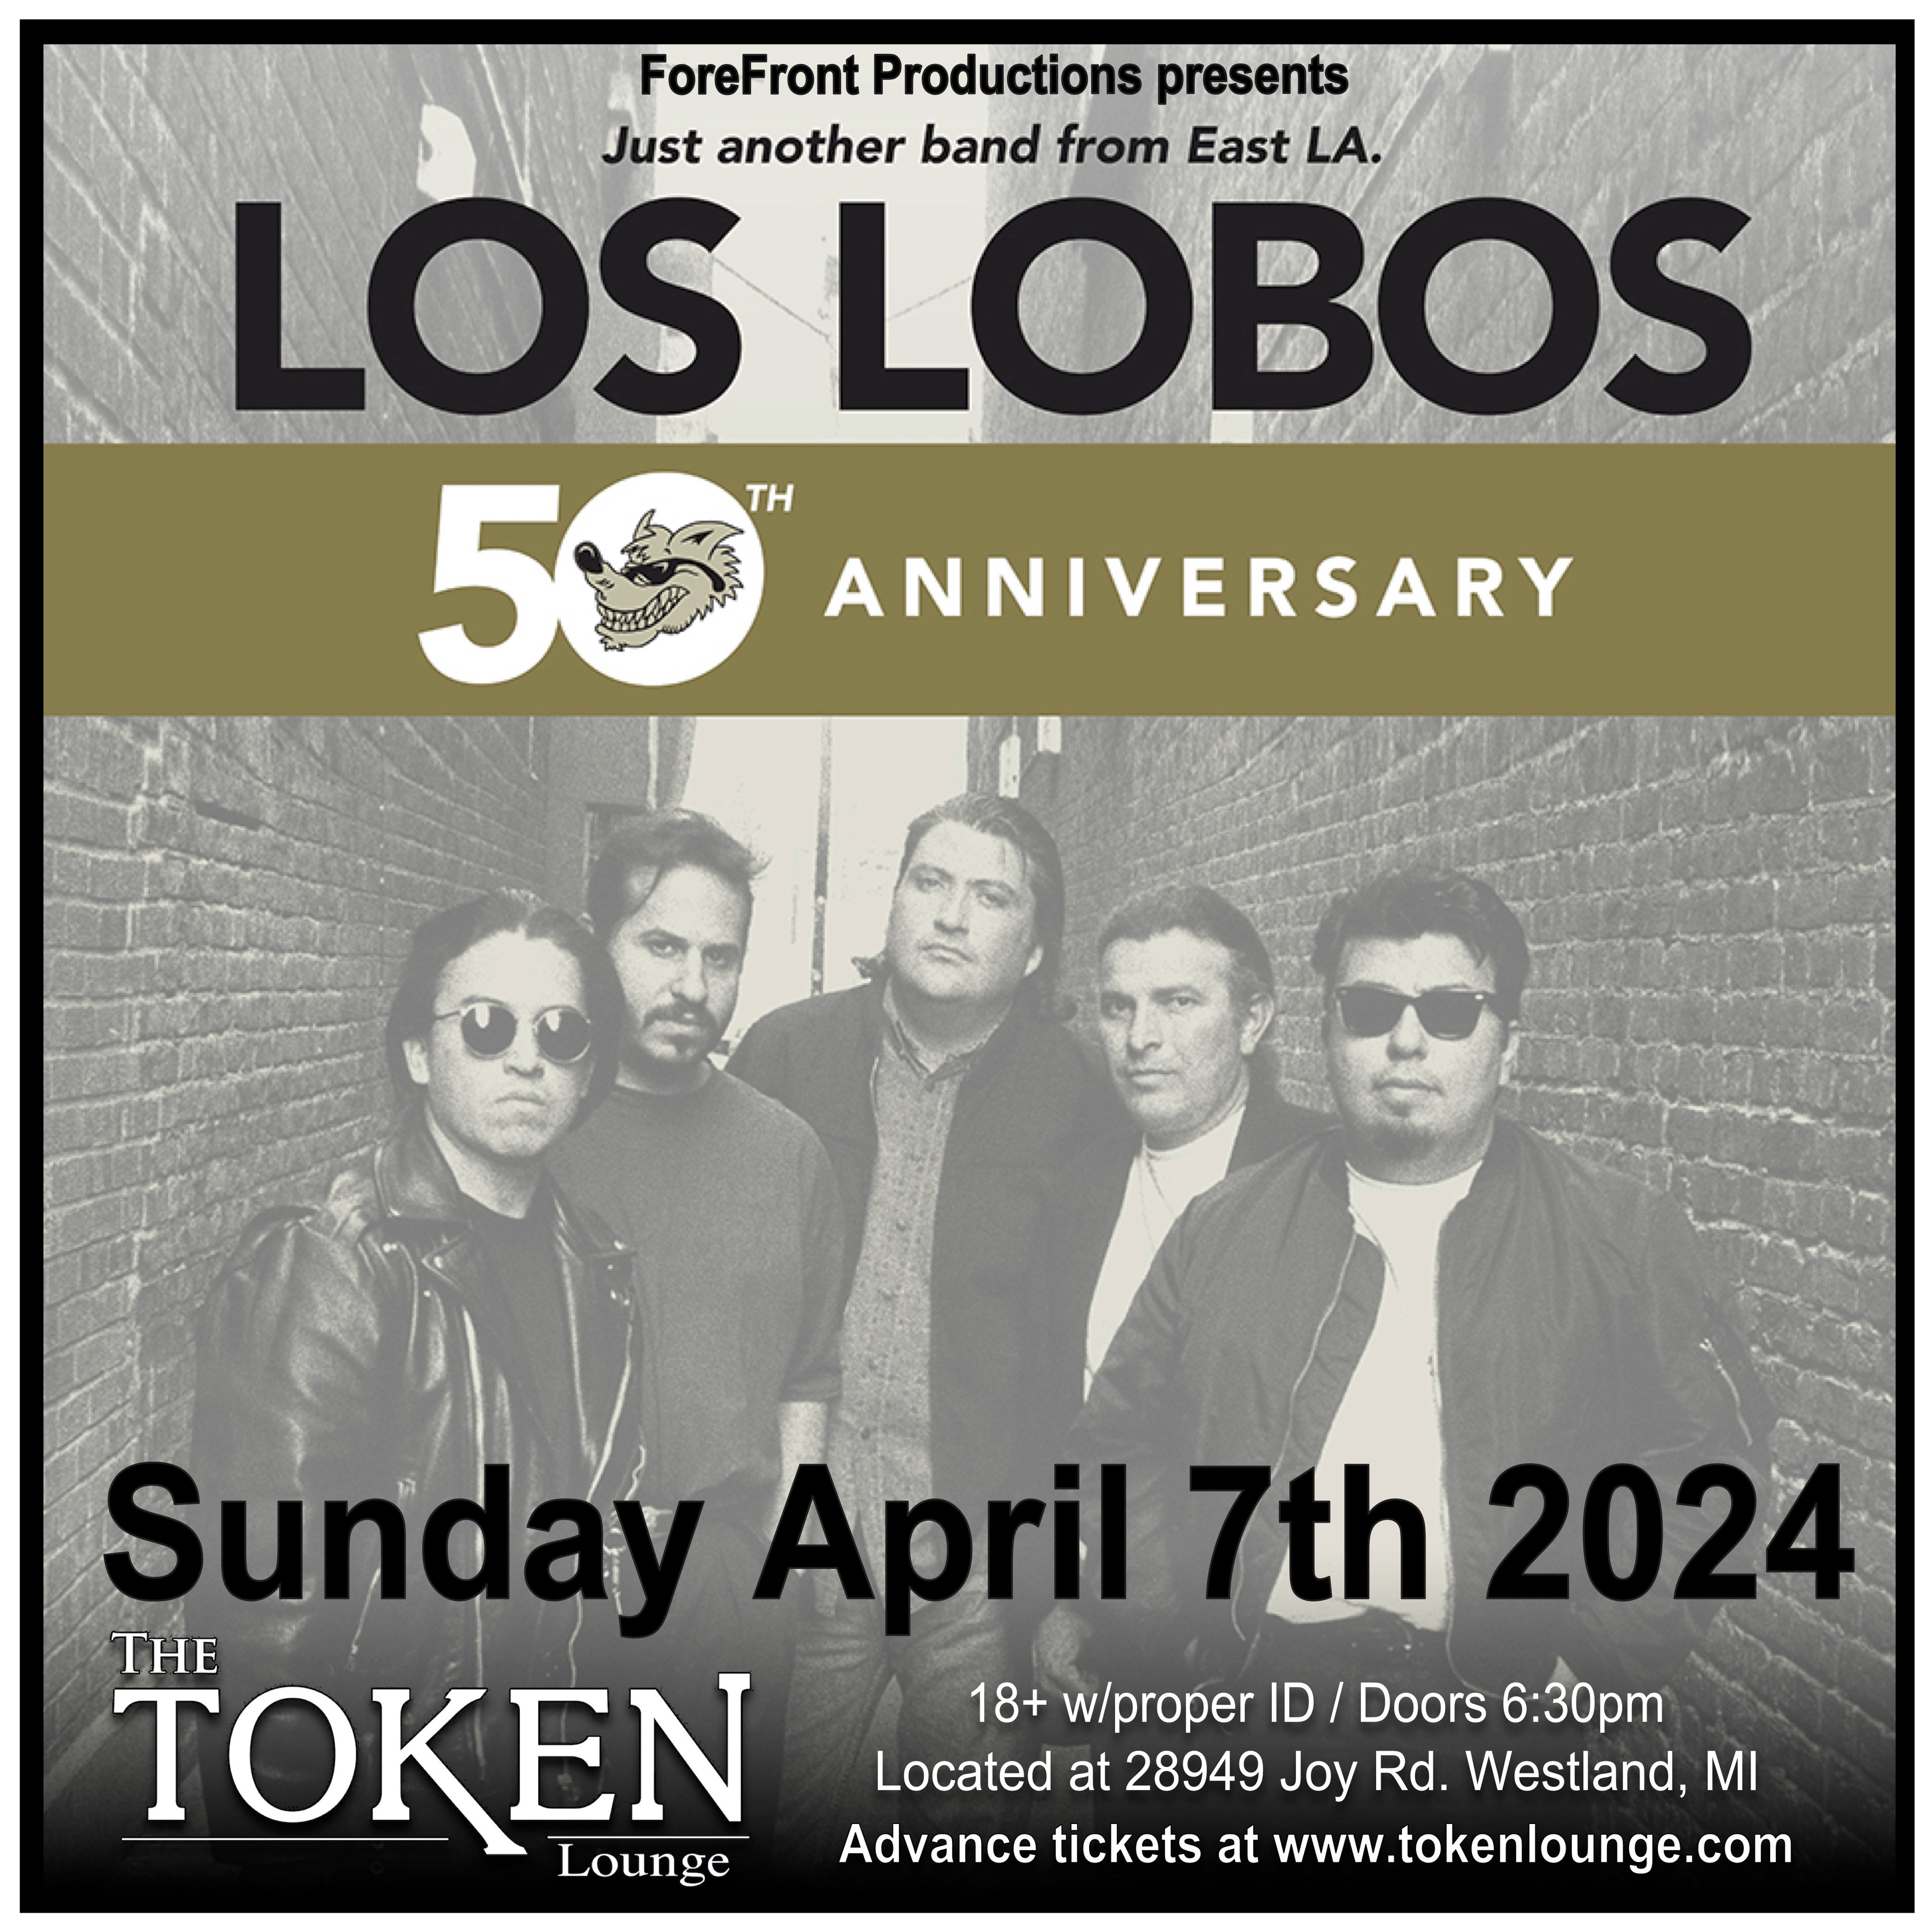 From East L.A. to MI: Los Lobos' 50th Anniversary Celebration Hits Westland